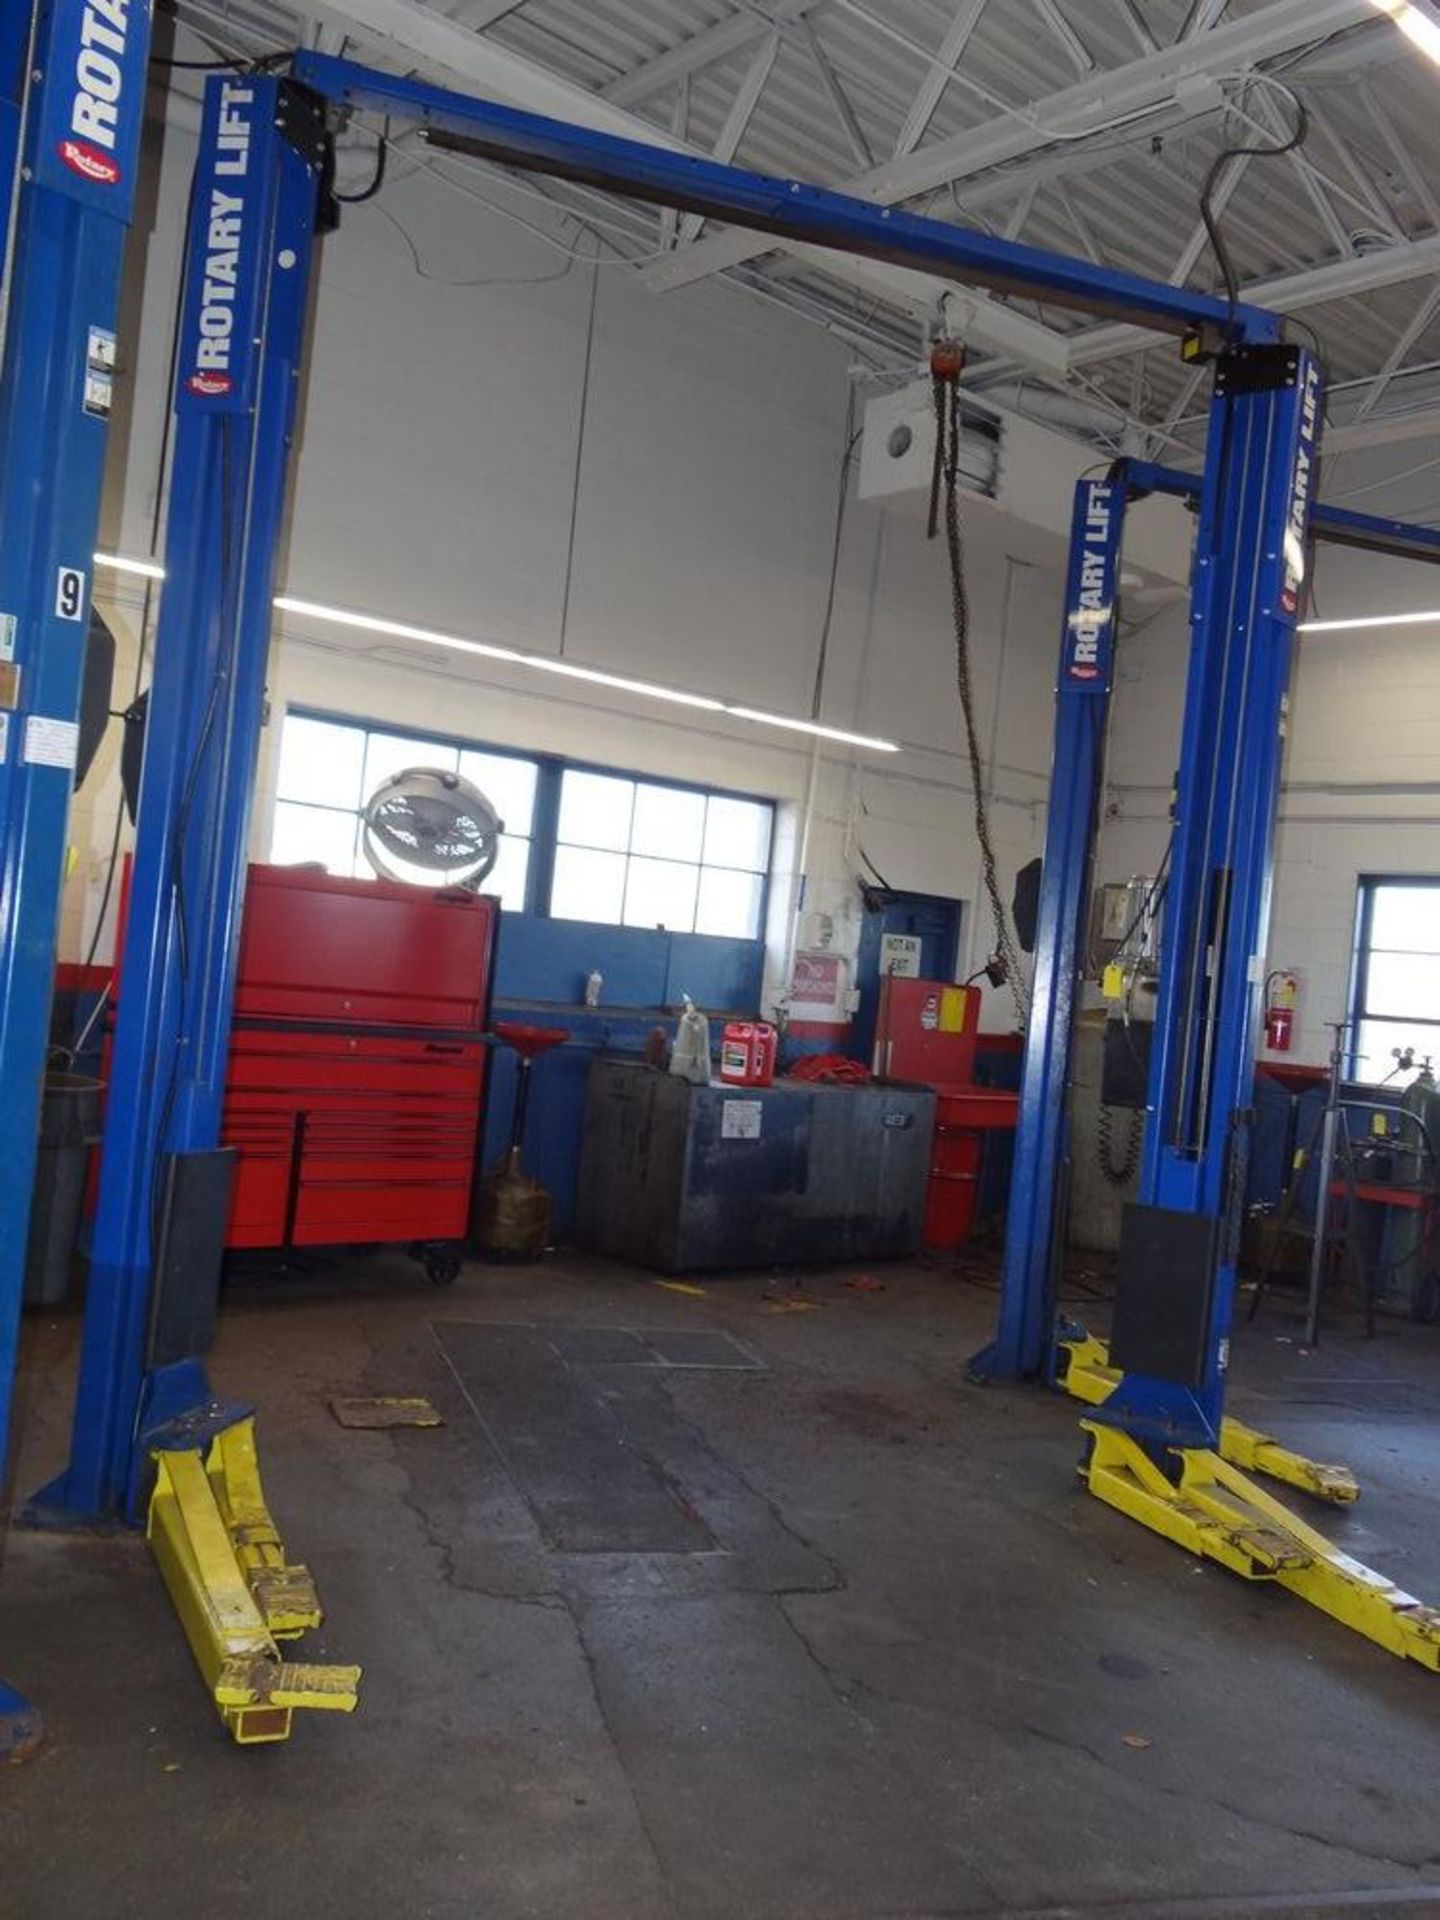 (1) Rotary SPOA10N915. 10,000 Pound 2 Position Lift. The lifts will be disassembled for removal